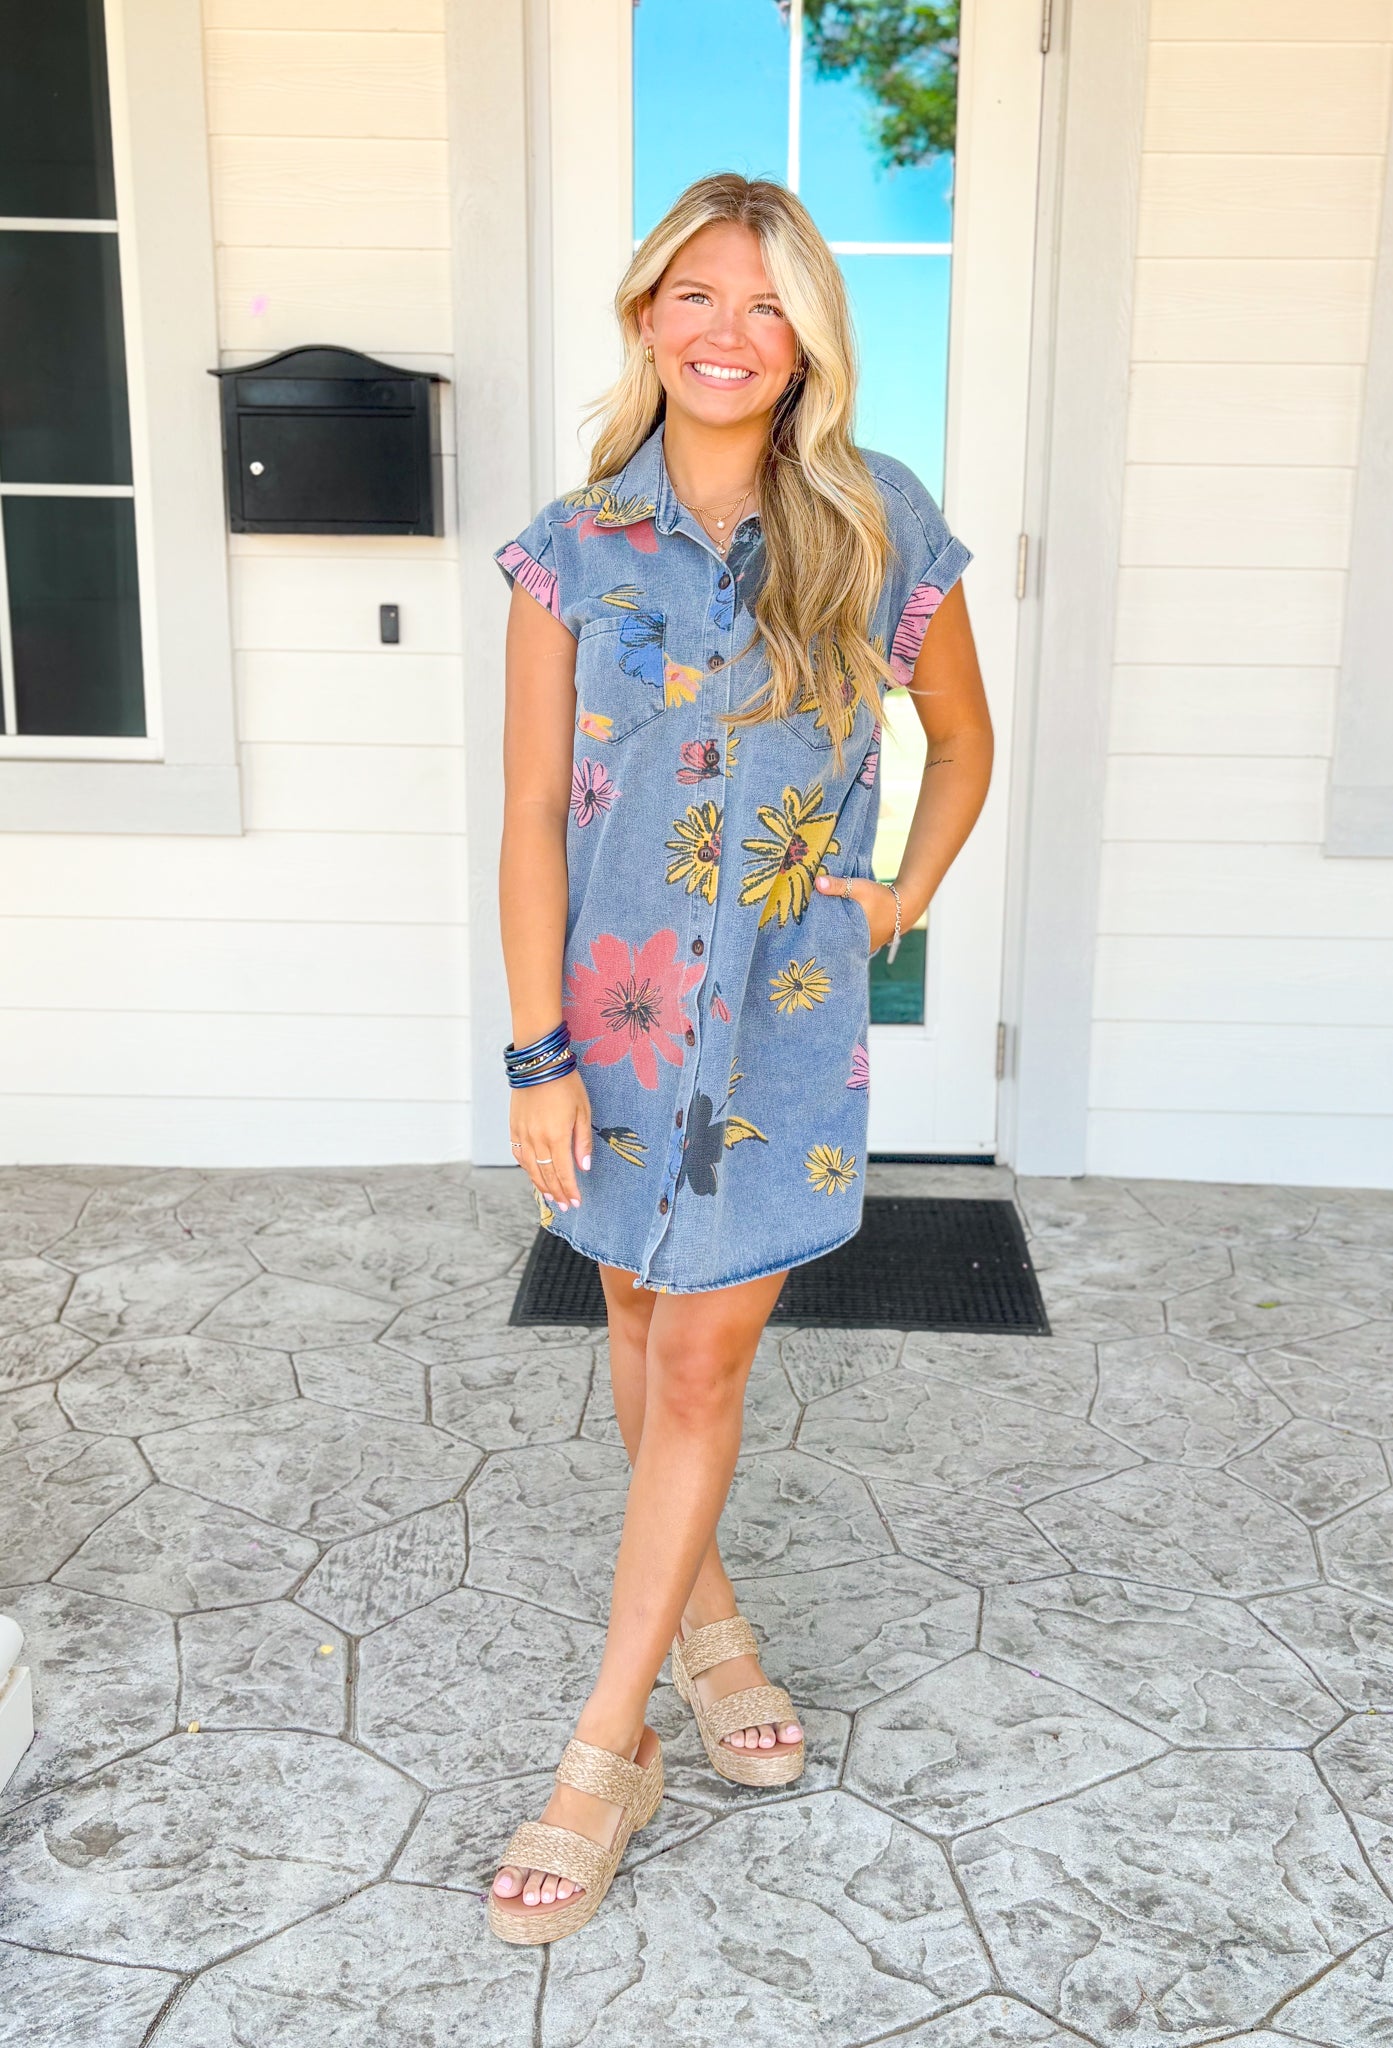 Feels Like Summer Dress, medium wash short sleeve button down denim dress with two pockets on the chest and pockets, pinkish red, yellow, and blue enlarged floral design covering the dress with charcoal outlines 